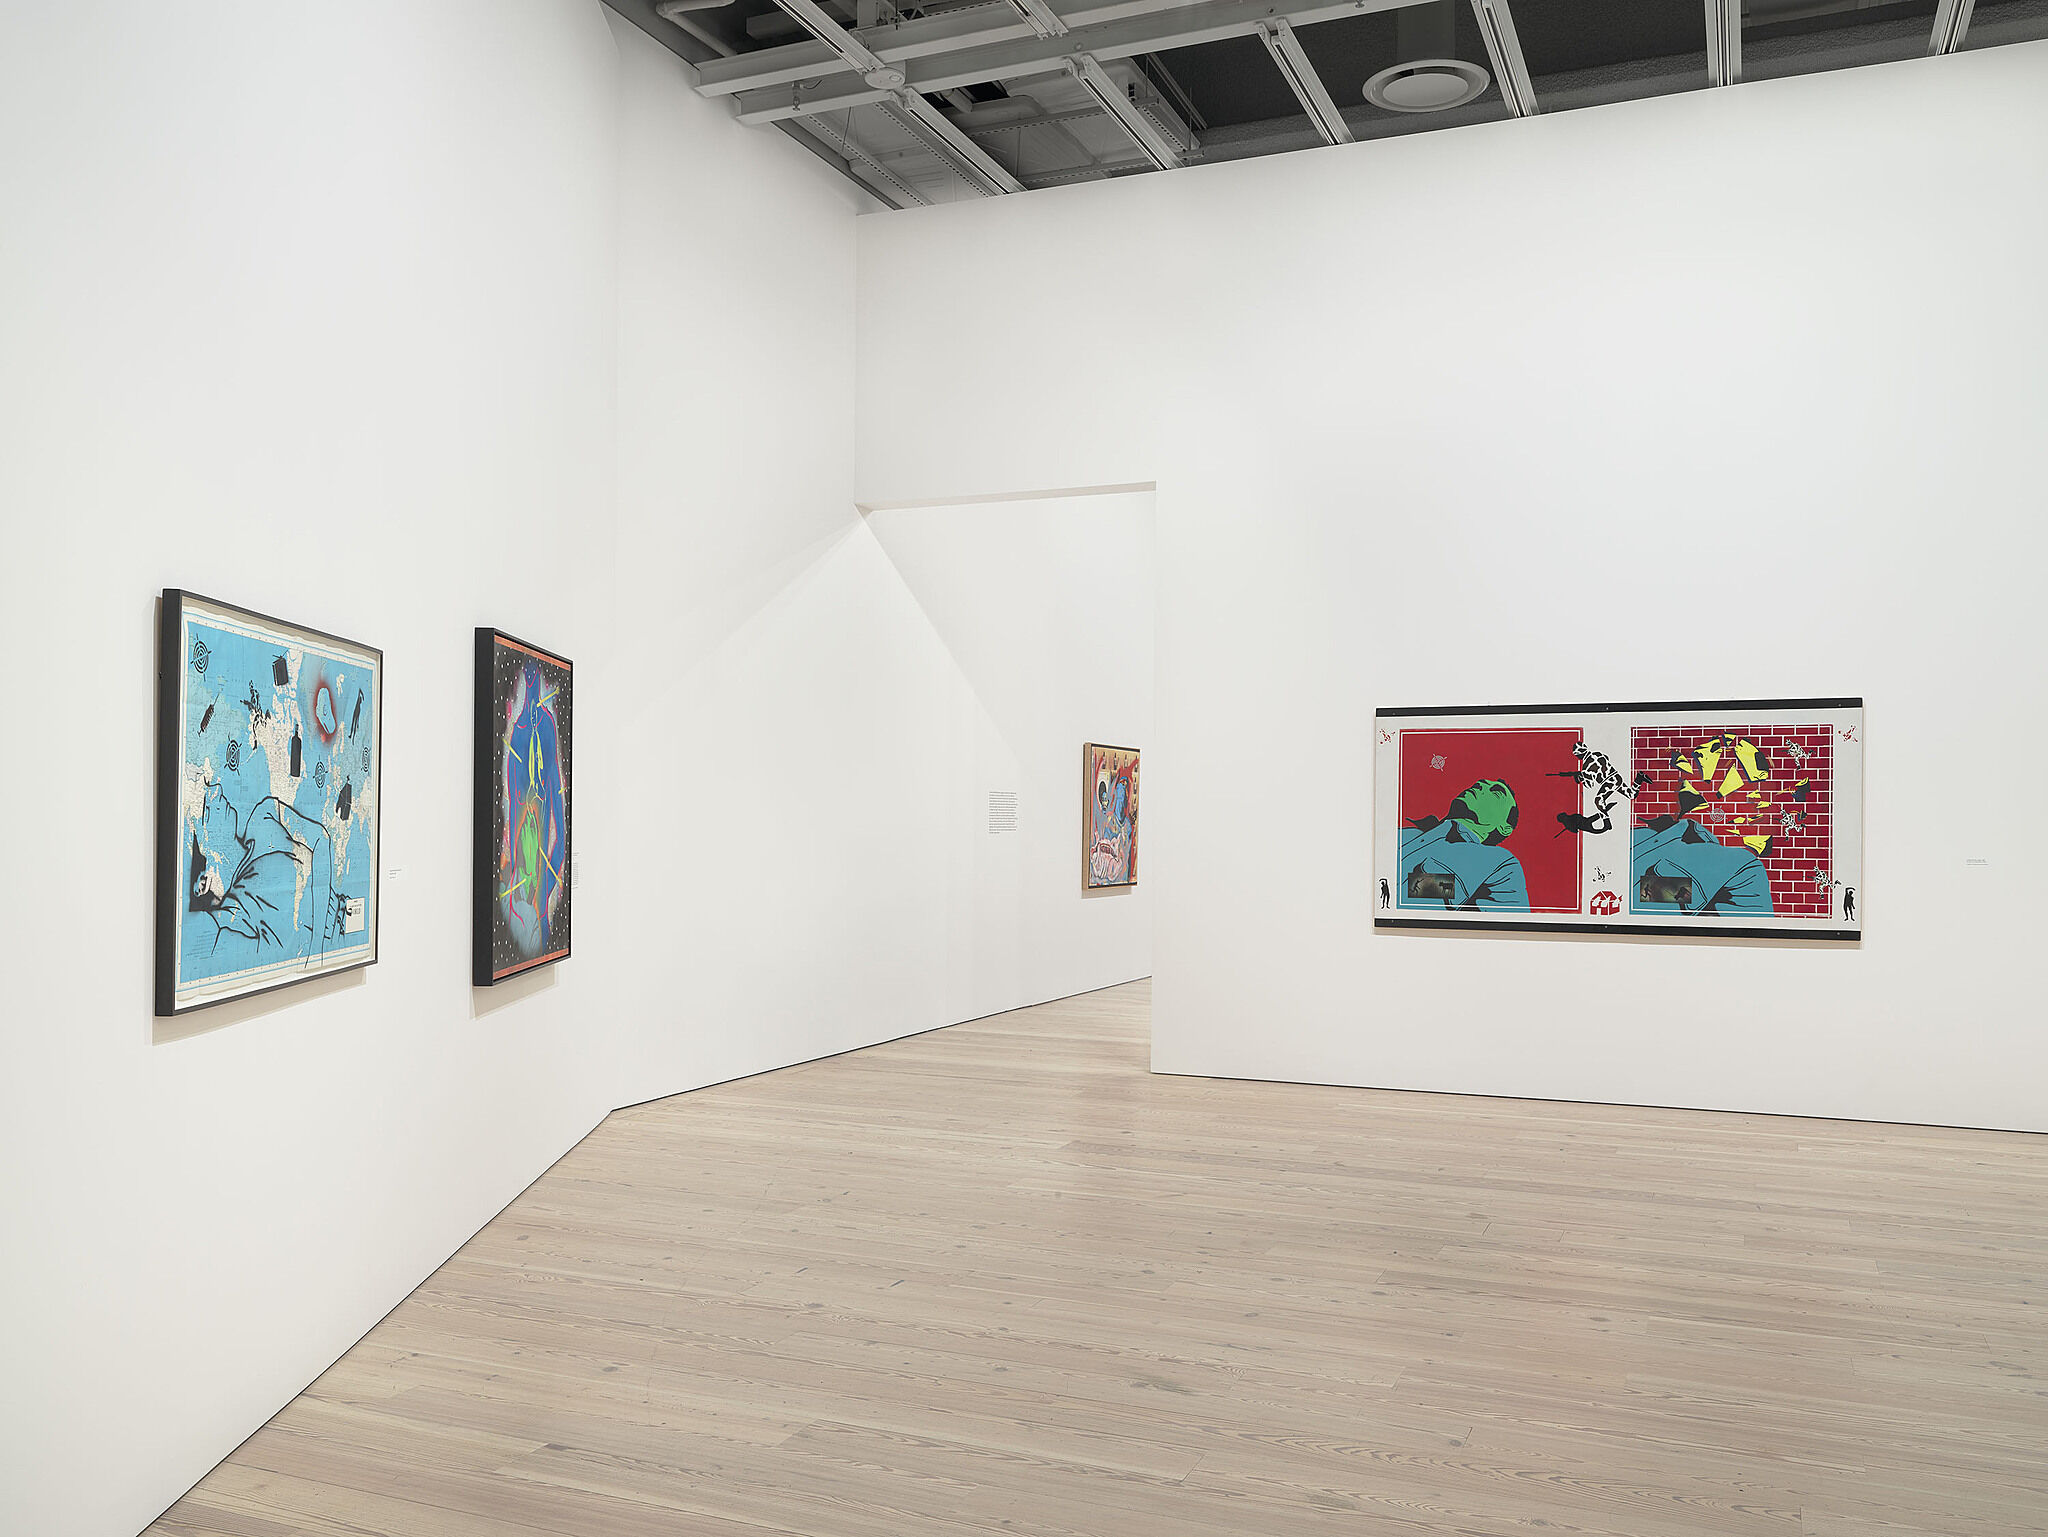 An image of the Whitney galleries with various artworks on the wall